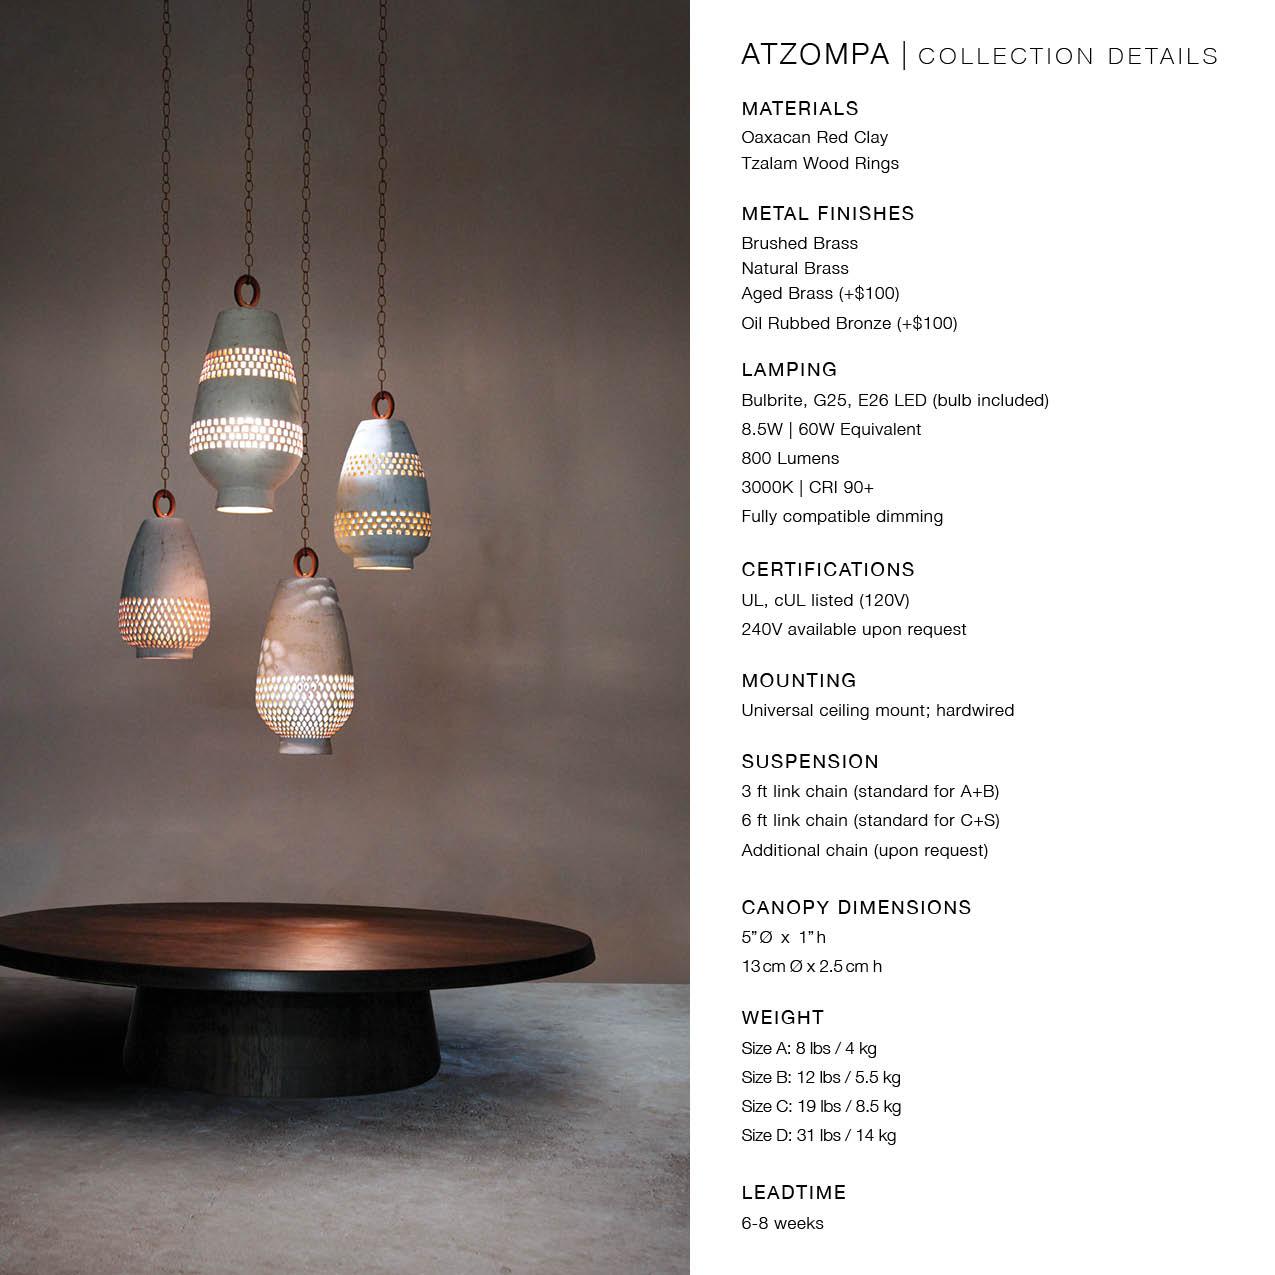 Medium White Ceramic Pendant Light, Natural Brass, Ajedrez Atzompa Collection In New Condition For Sale In New York, NY